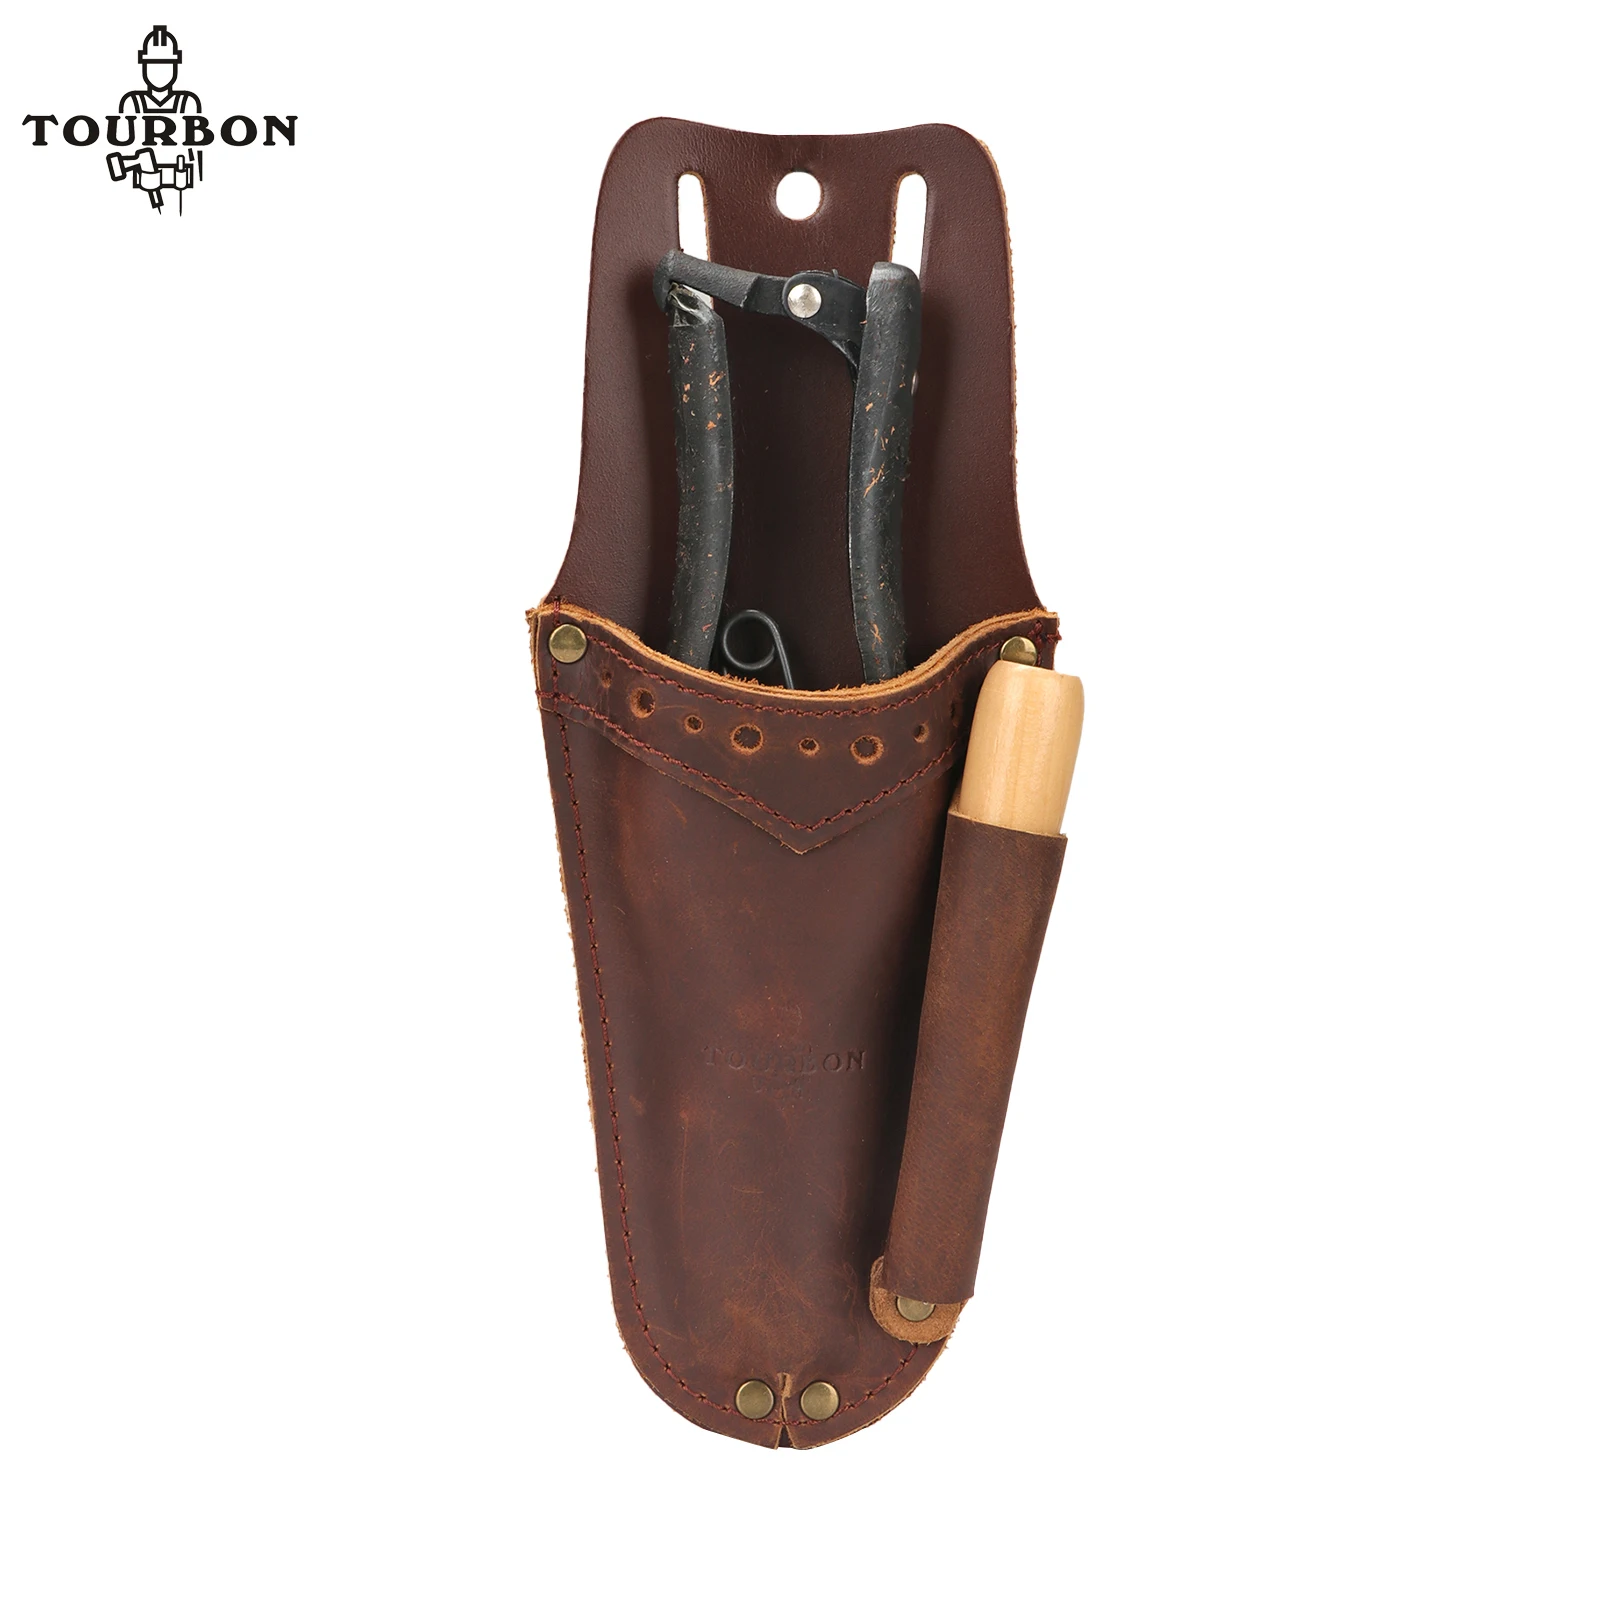 

Tourbon Gardening Leather Pliers Pockect Pruning Shears Pruner Scabbard Pouch Tool Holder Brown with Belt Loop